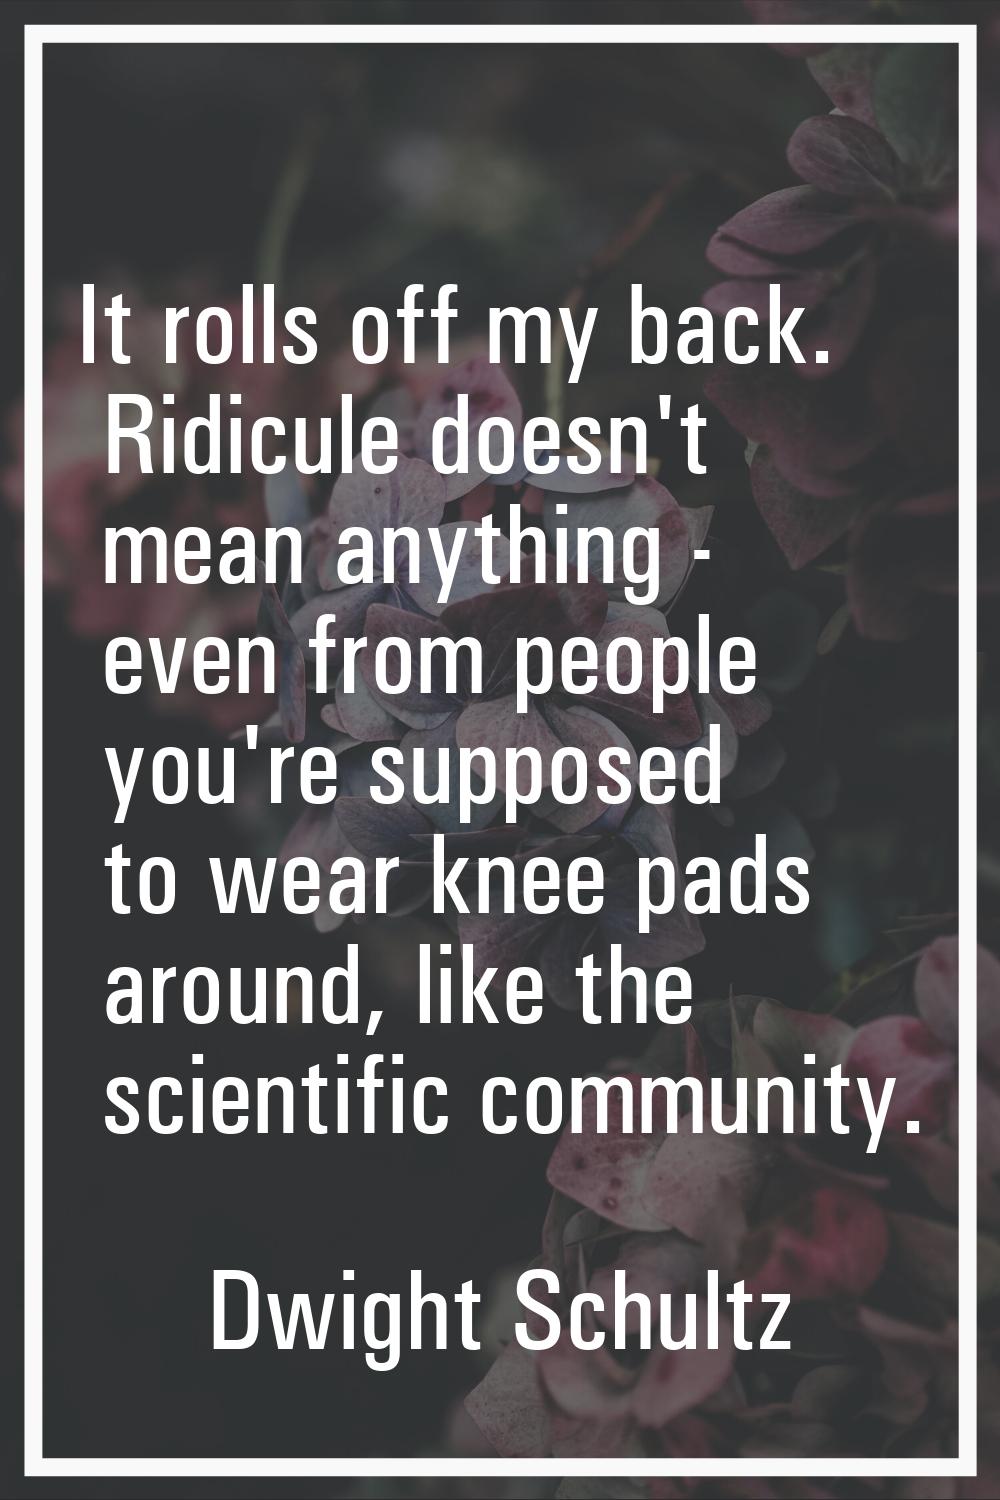 It rolls off my back. Ridicule doesn't mean anything - even from people you're supposed to wear kne